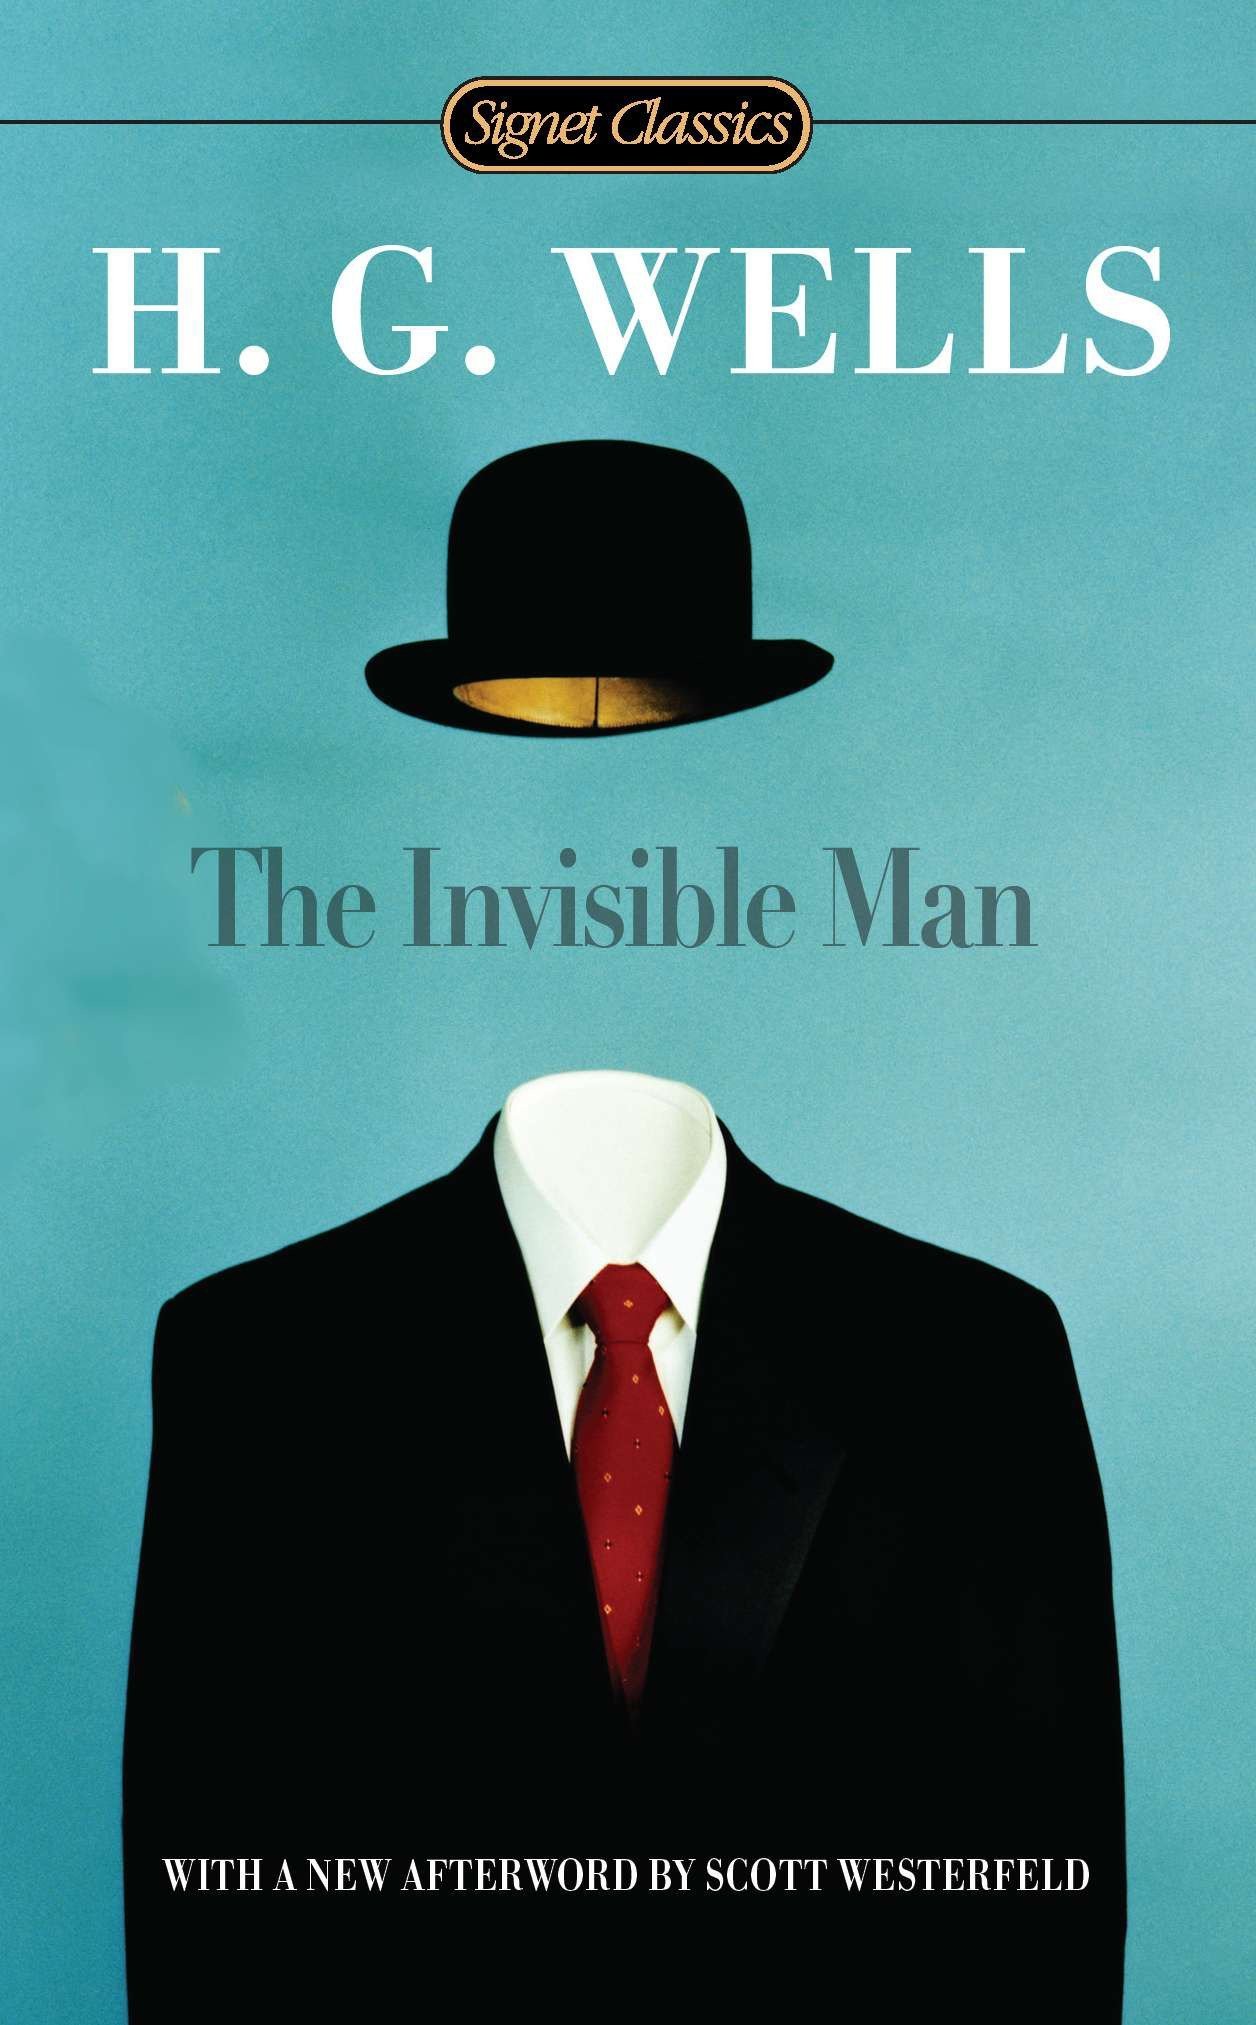 “The Invisible Man” by H.G. Wells (a review)